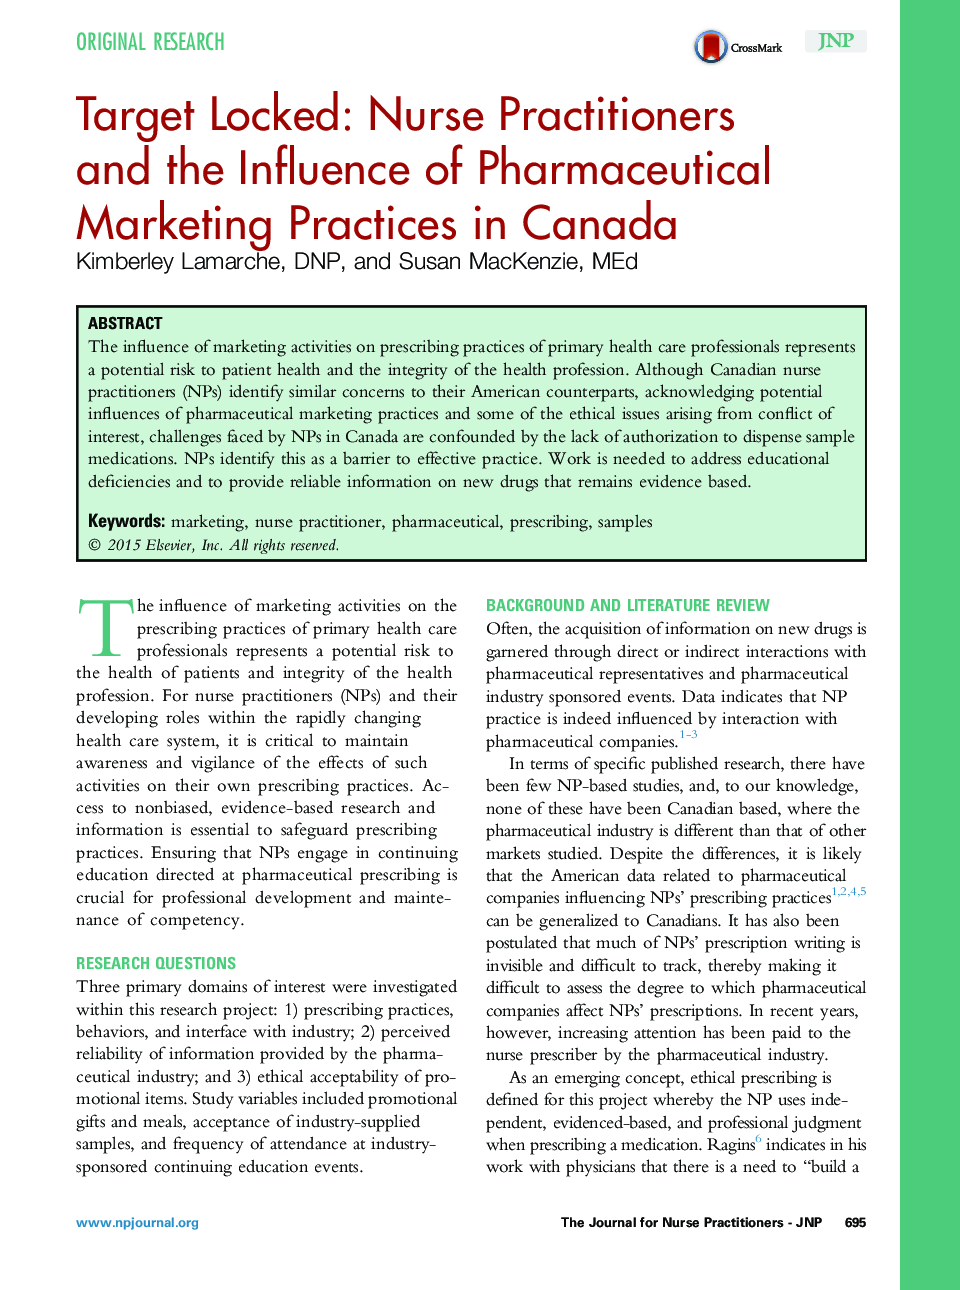 Original ResearchTarget Locked: Nurse Practitioners andÂ the Influence of Pharmaceutical Marketing Practices in Canada